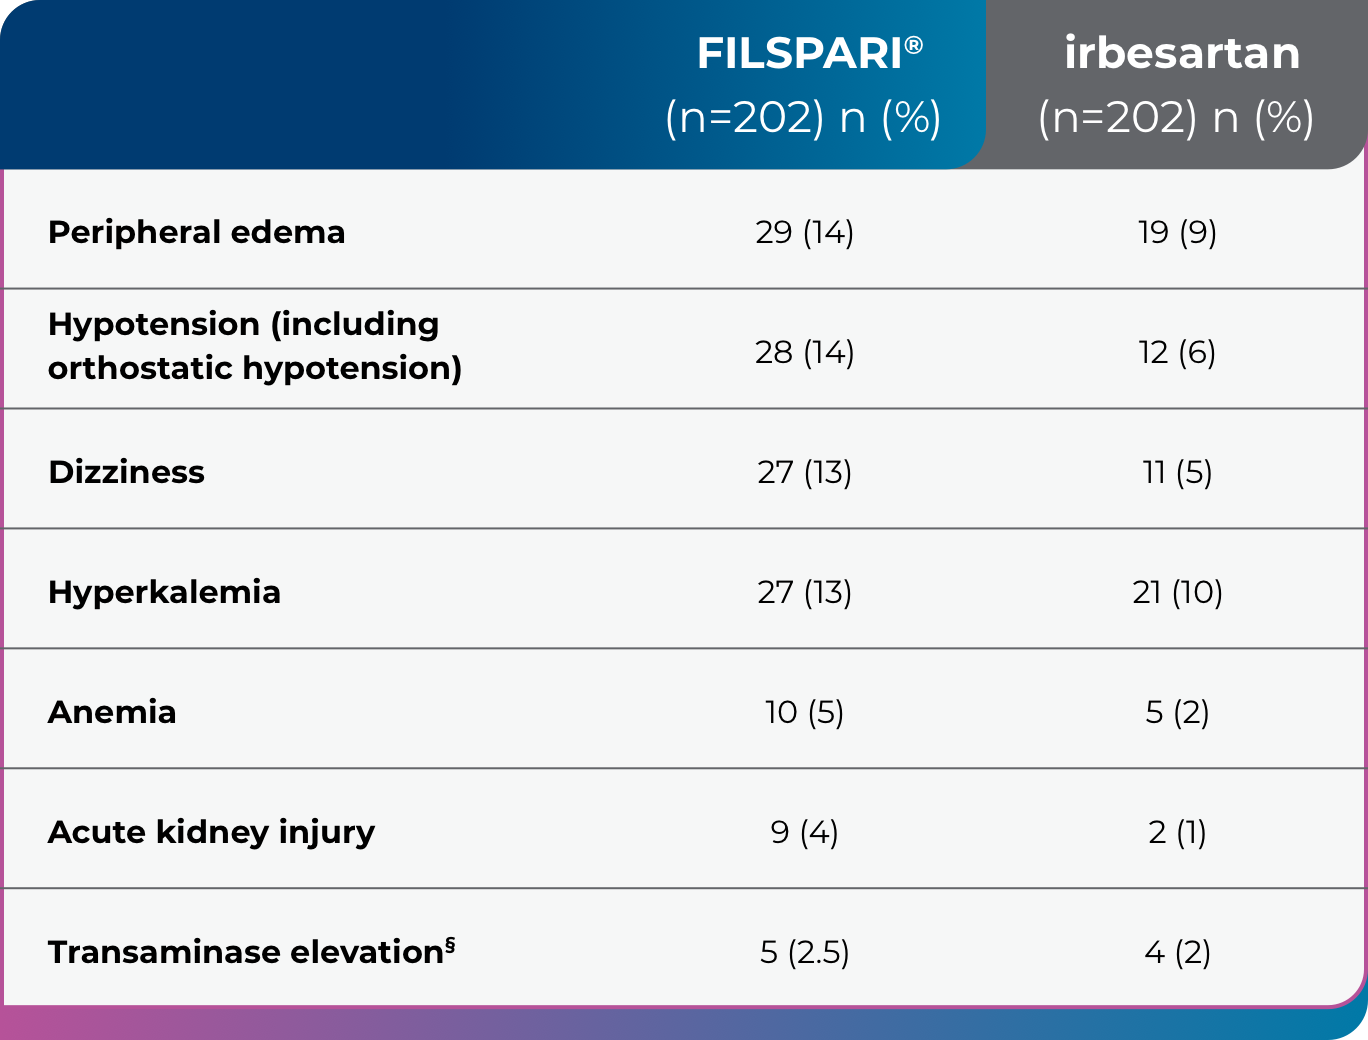 Chart showing the percentage of adverse reactions experienced by patients treated with either FILSPARI or irbesartan during the PROTECT Study